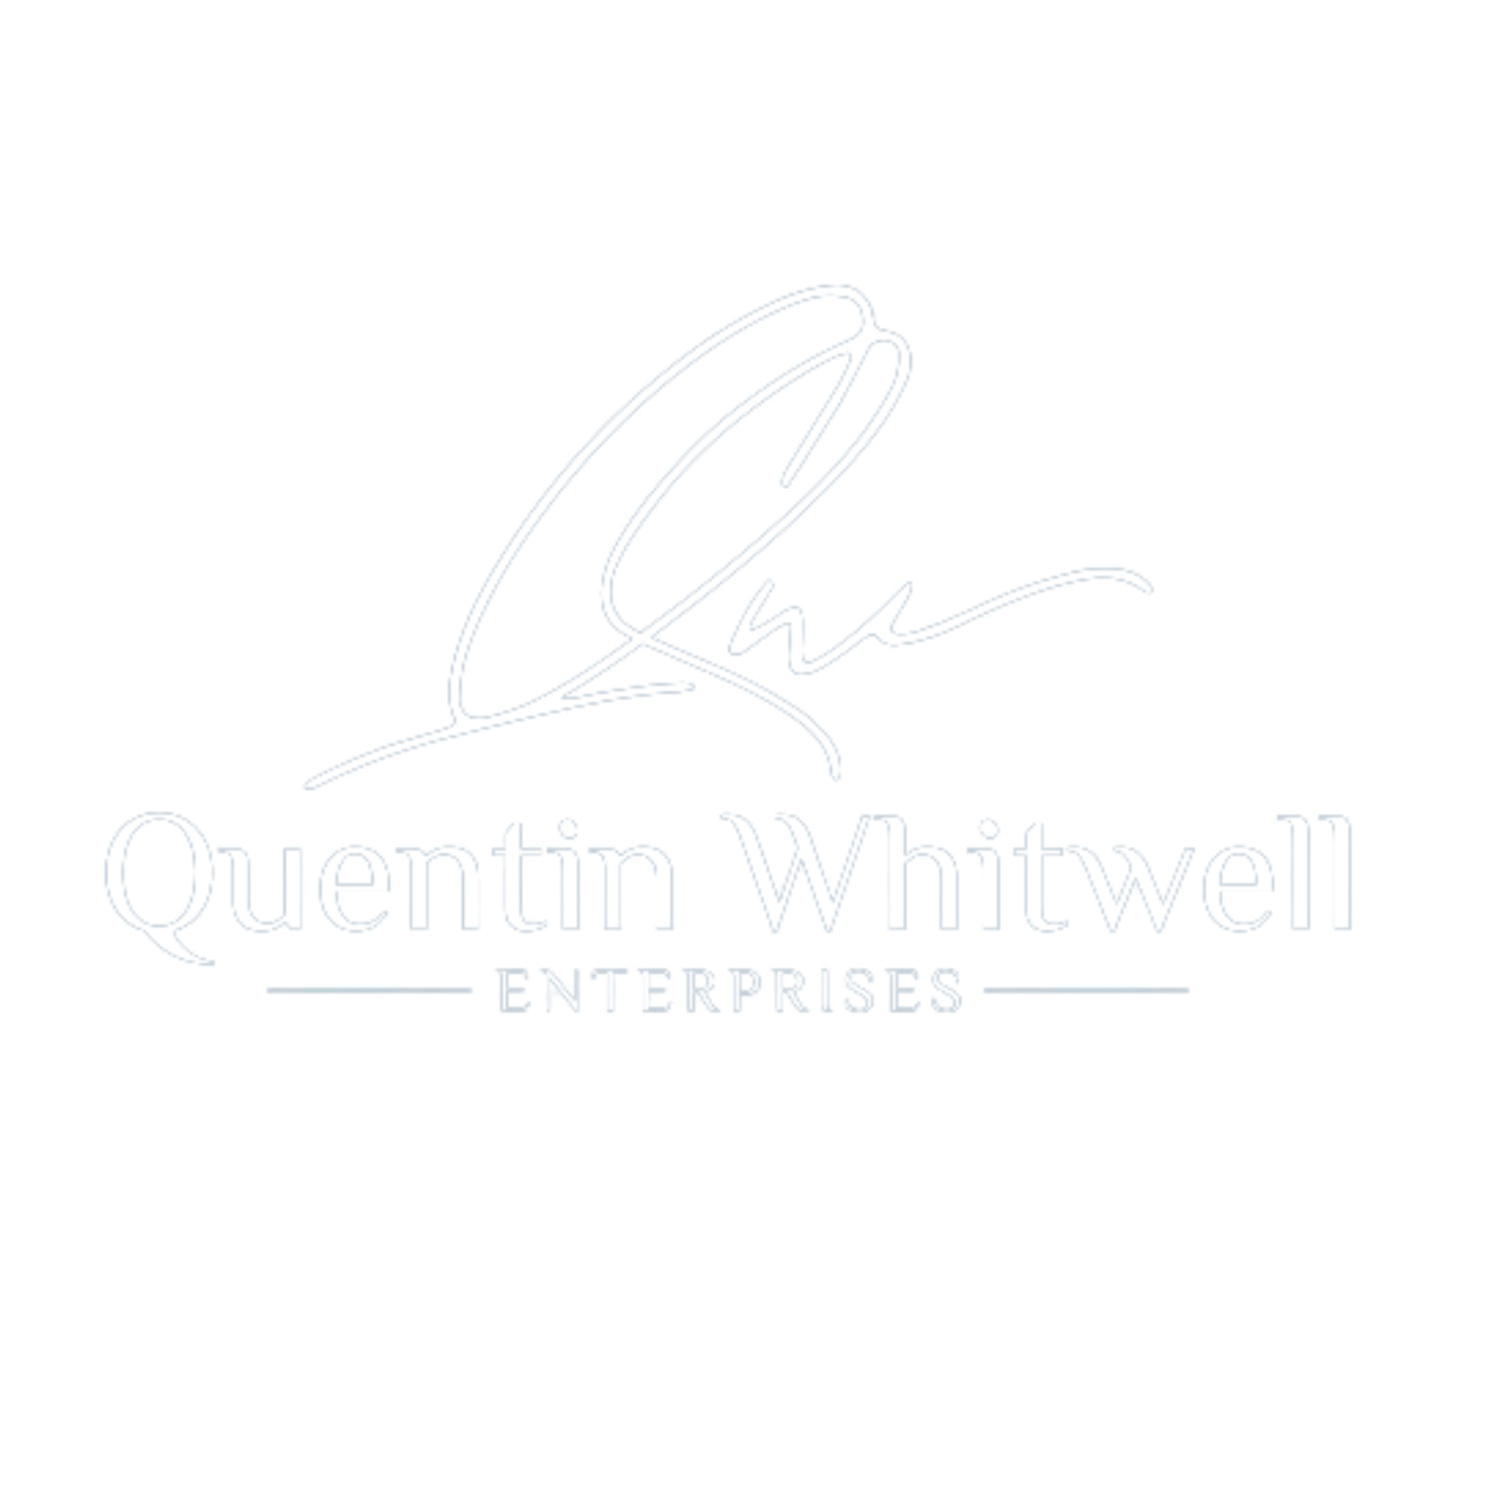 Quentin Whitwell